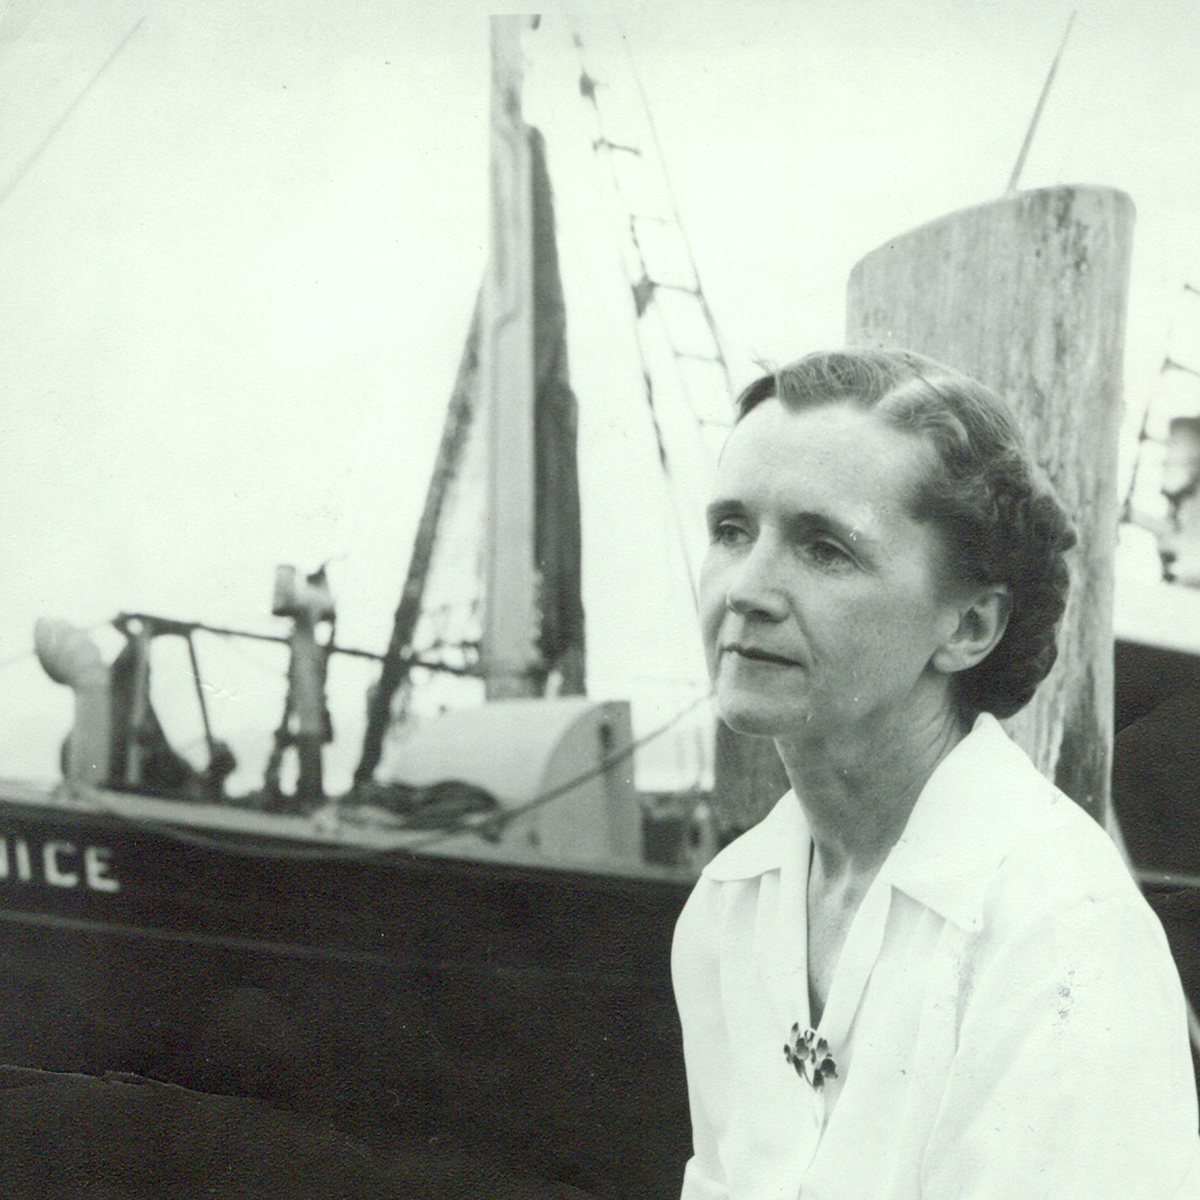 Black and white photo of Rachel Carson sitting on a dock, with a pencil and paper in her hand a boat in the background